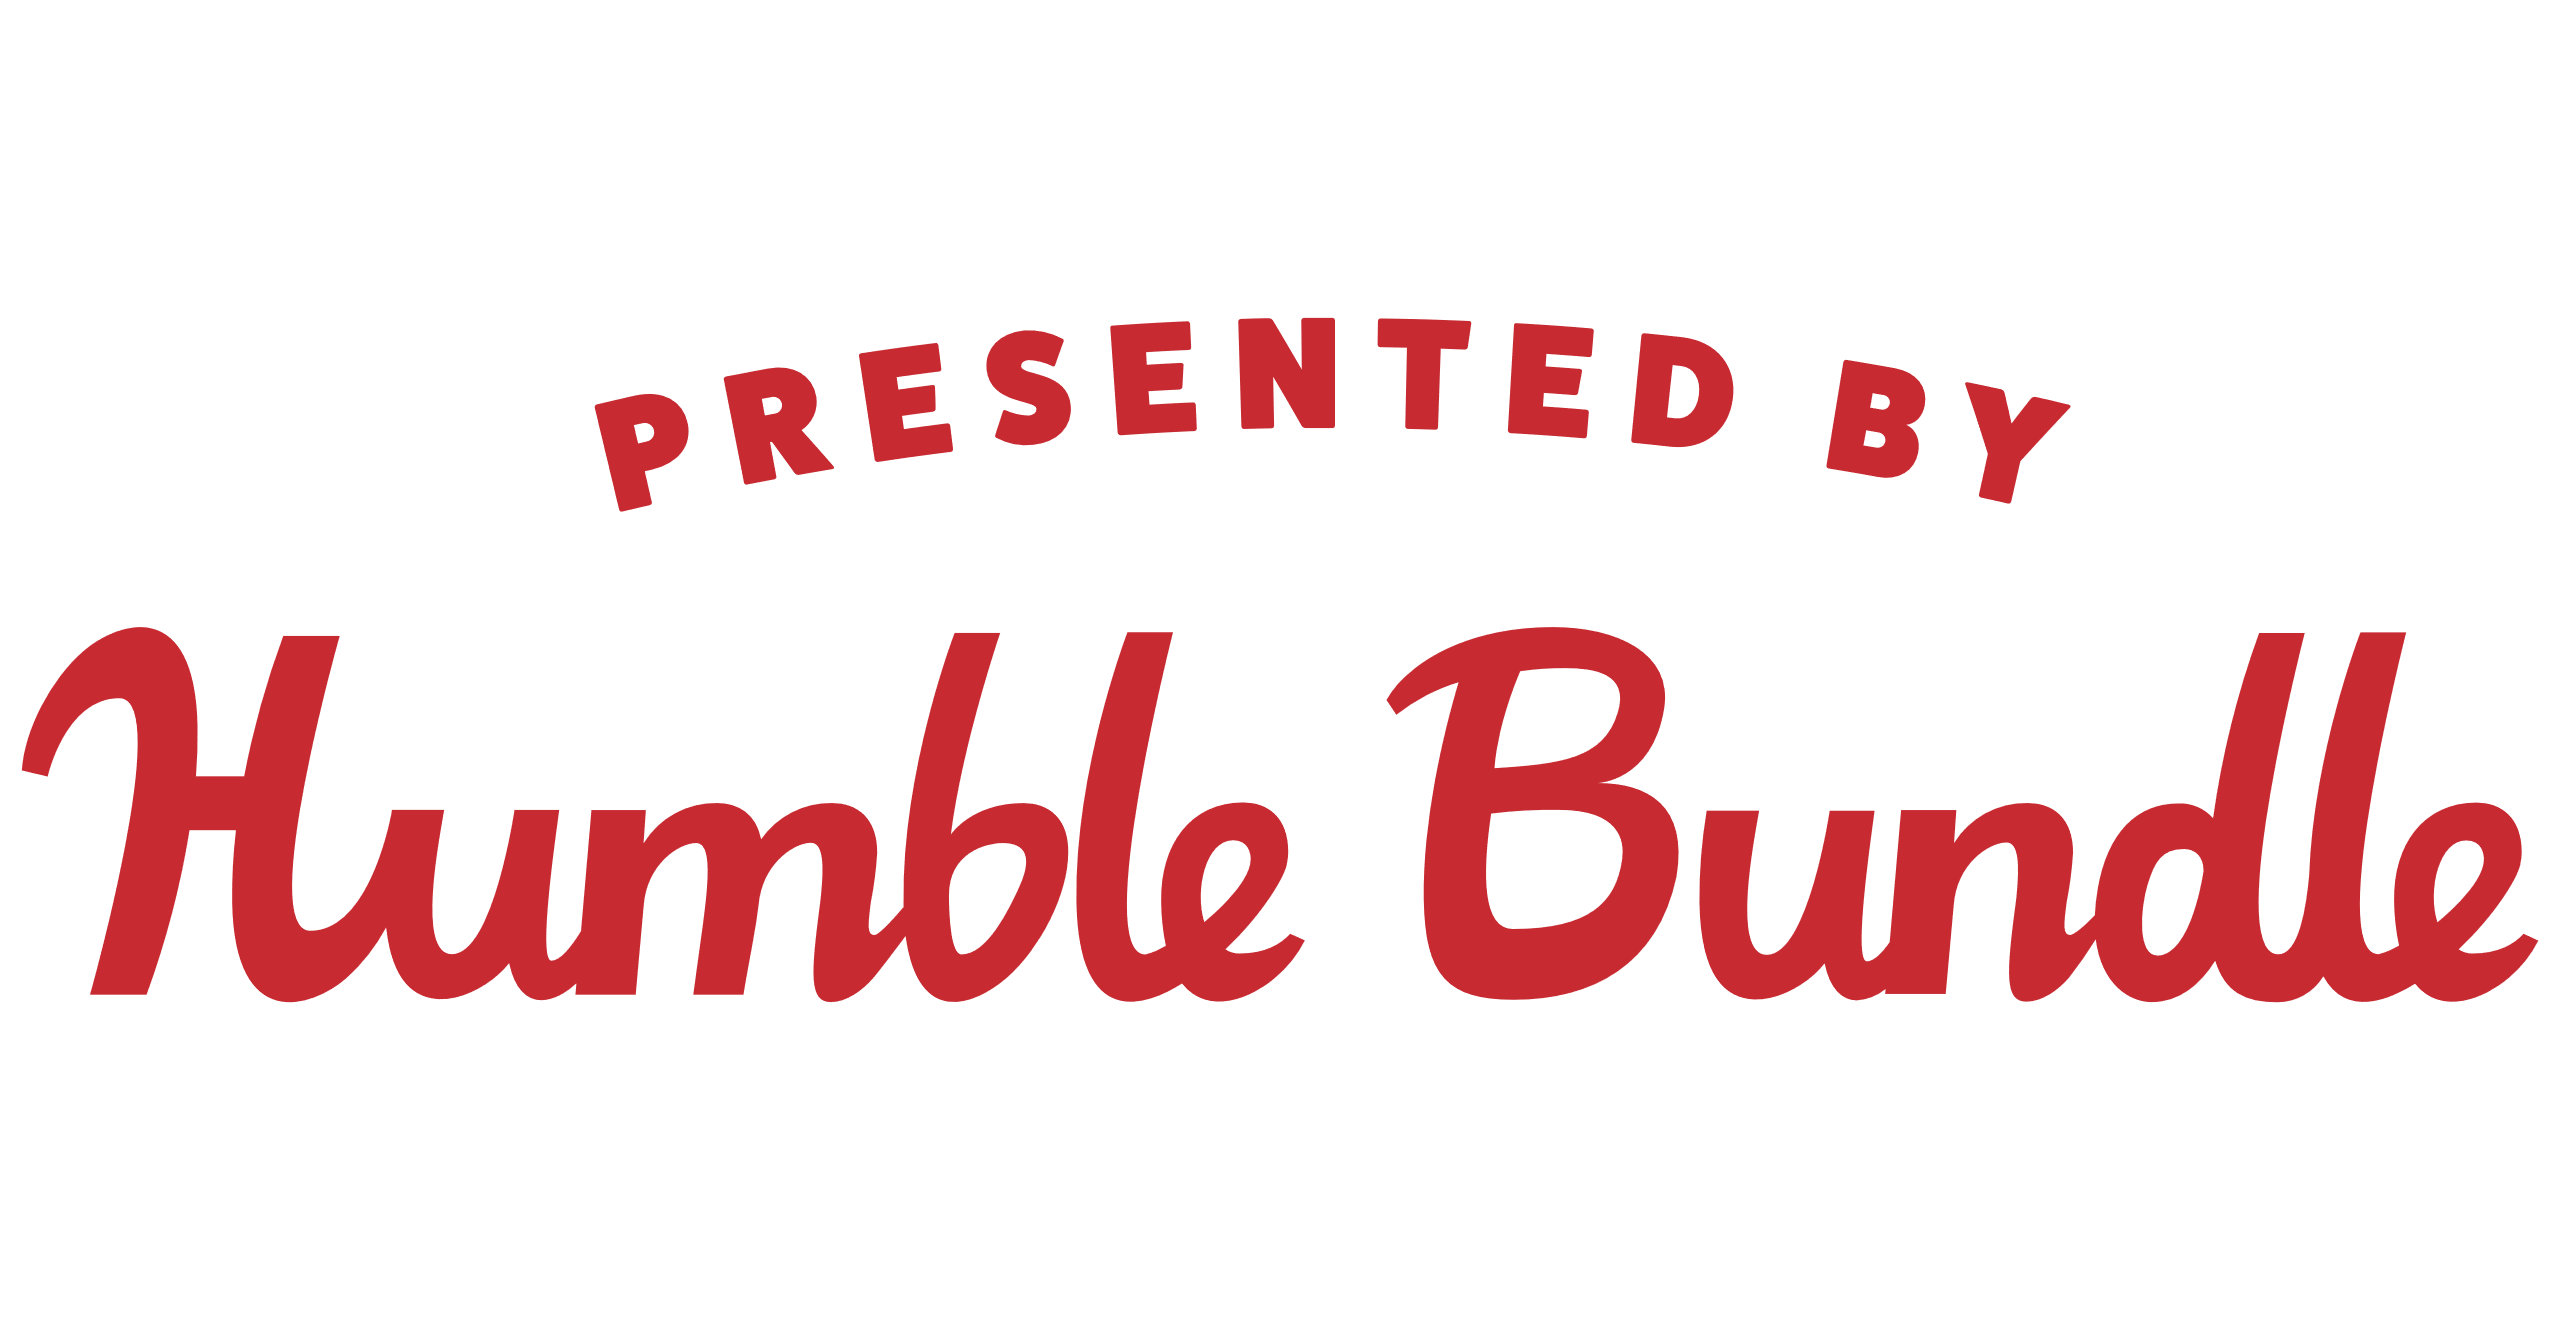 Humble Bundle to Showcase Five Games in Gamescom and PAX West - Games Are Published Under Humble Bundle’s Brand